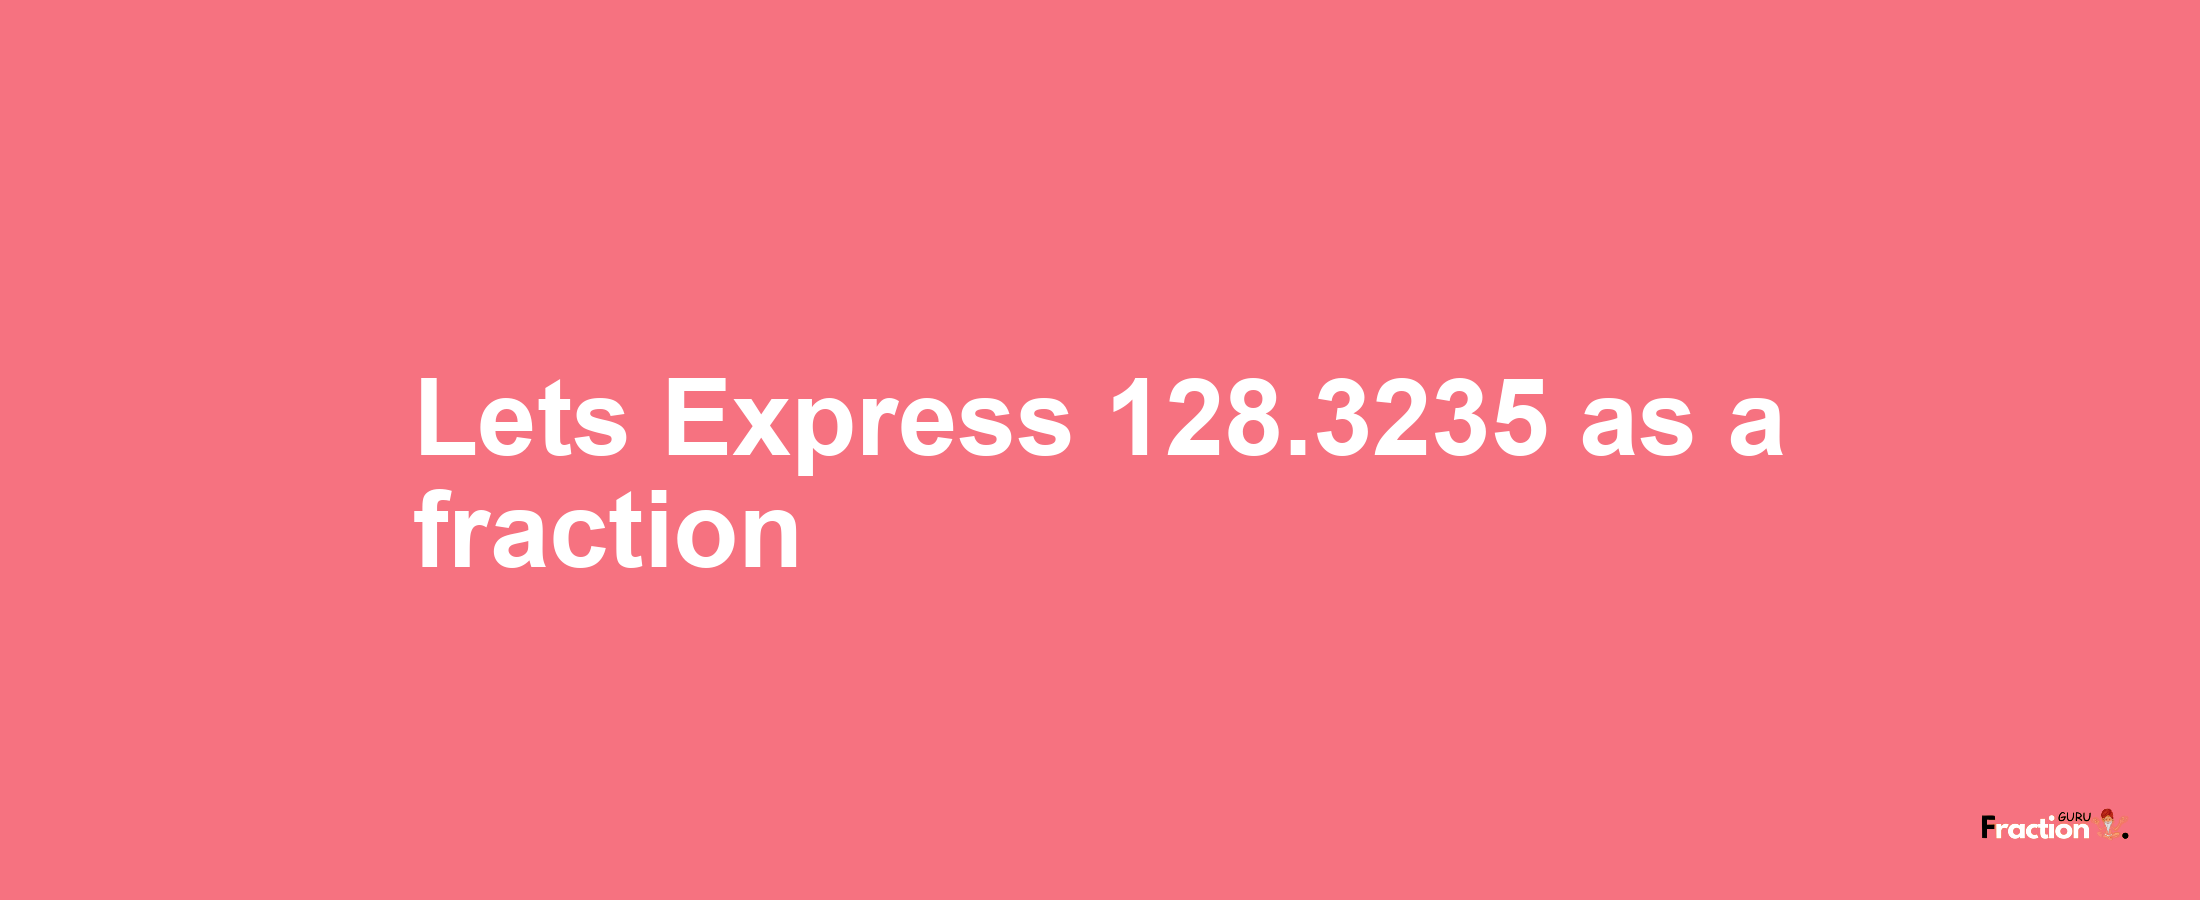 Lets Express 128.3235 as afraction